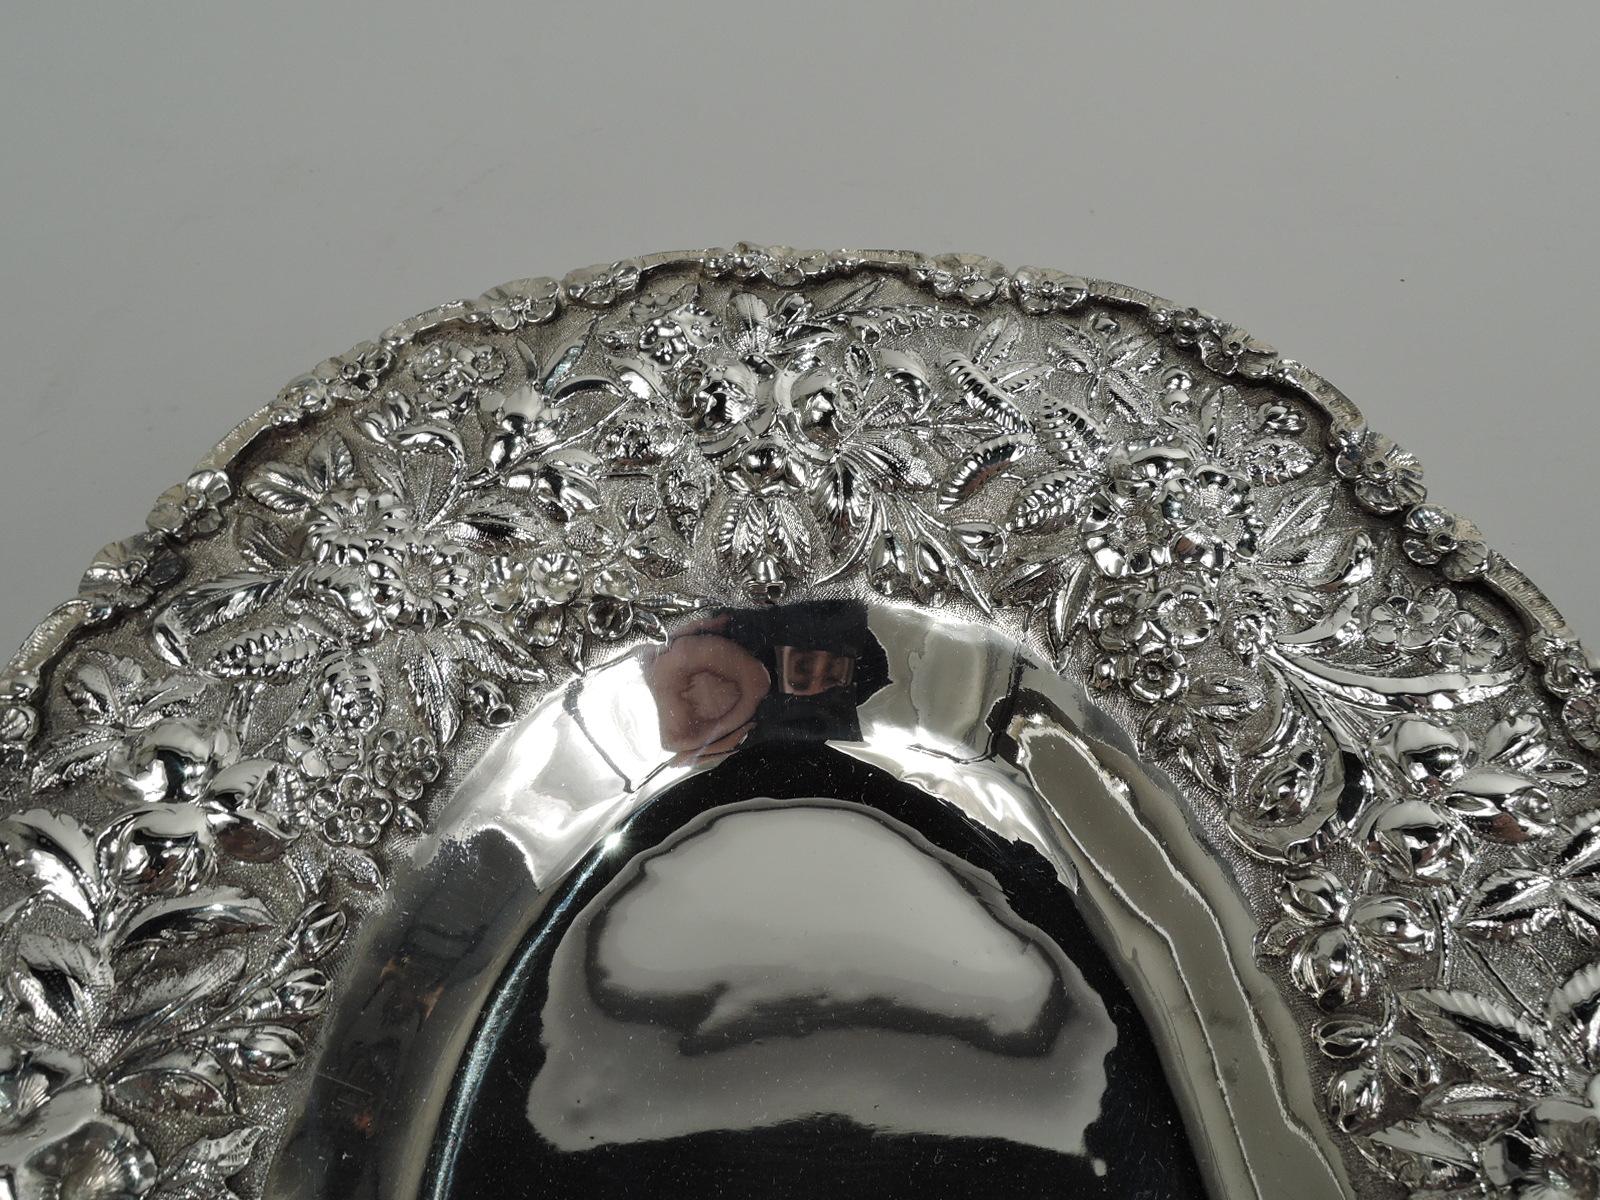 Victorian sterling silver bowl, ca 1890. Made by S. Kirk & Son in Baltimore. Plain oval well and wide shoulder with repousse ferns and flowers on stippled ground. Rim has applied c-scrolls and flower heads. A pretty piece in the historic regional